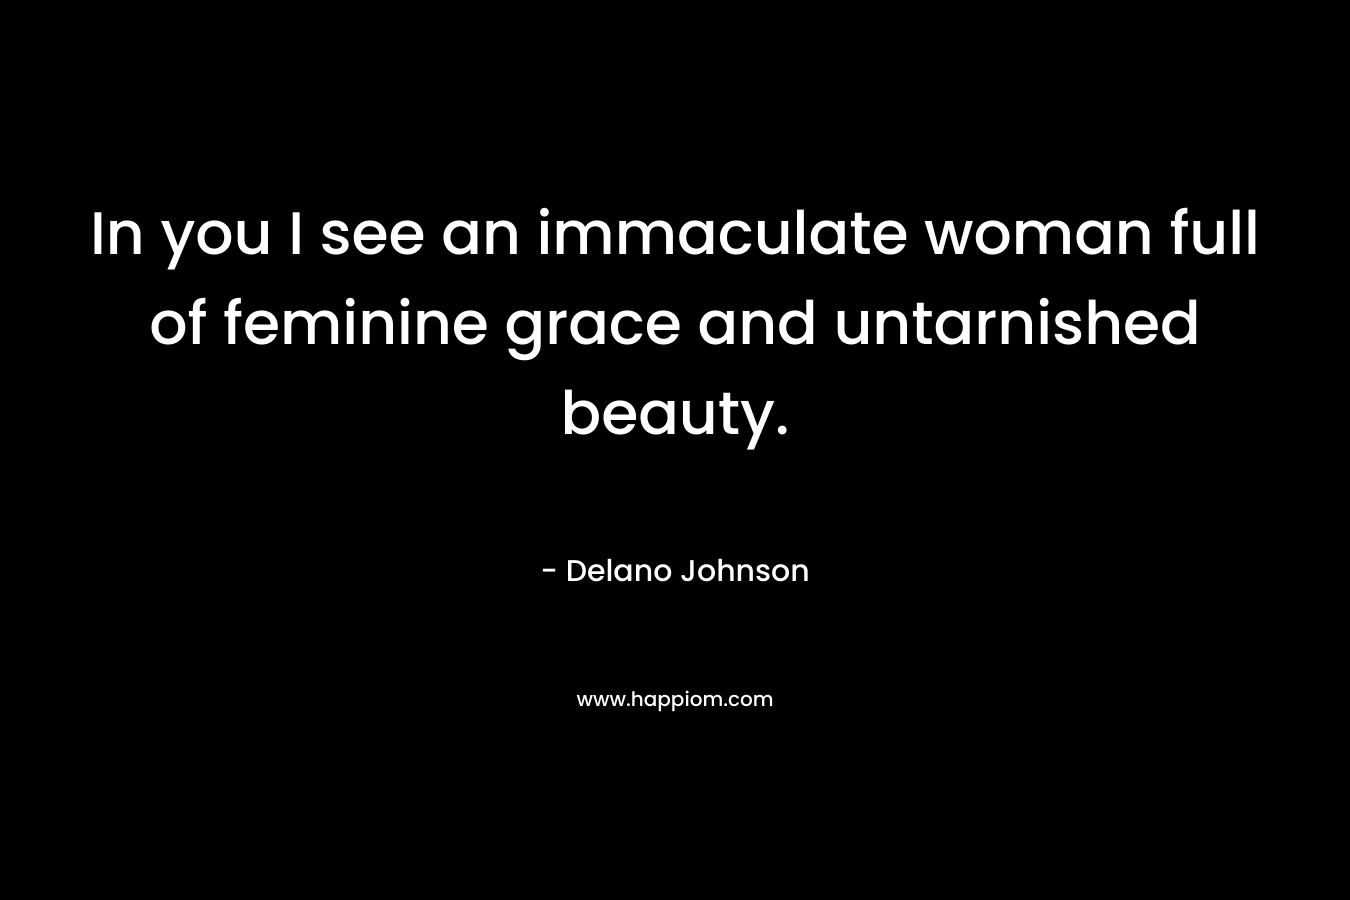 In you I see an immaculate woman full of feminine grace and untarnished beauty. – Delano Johnson